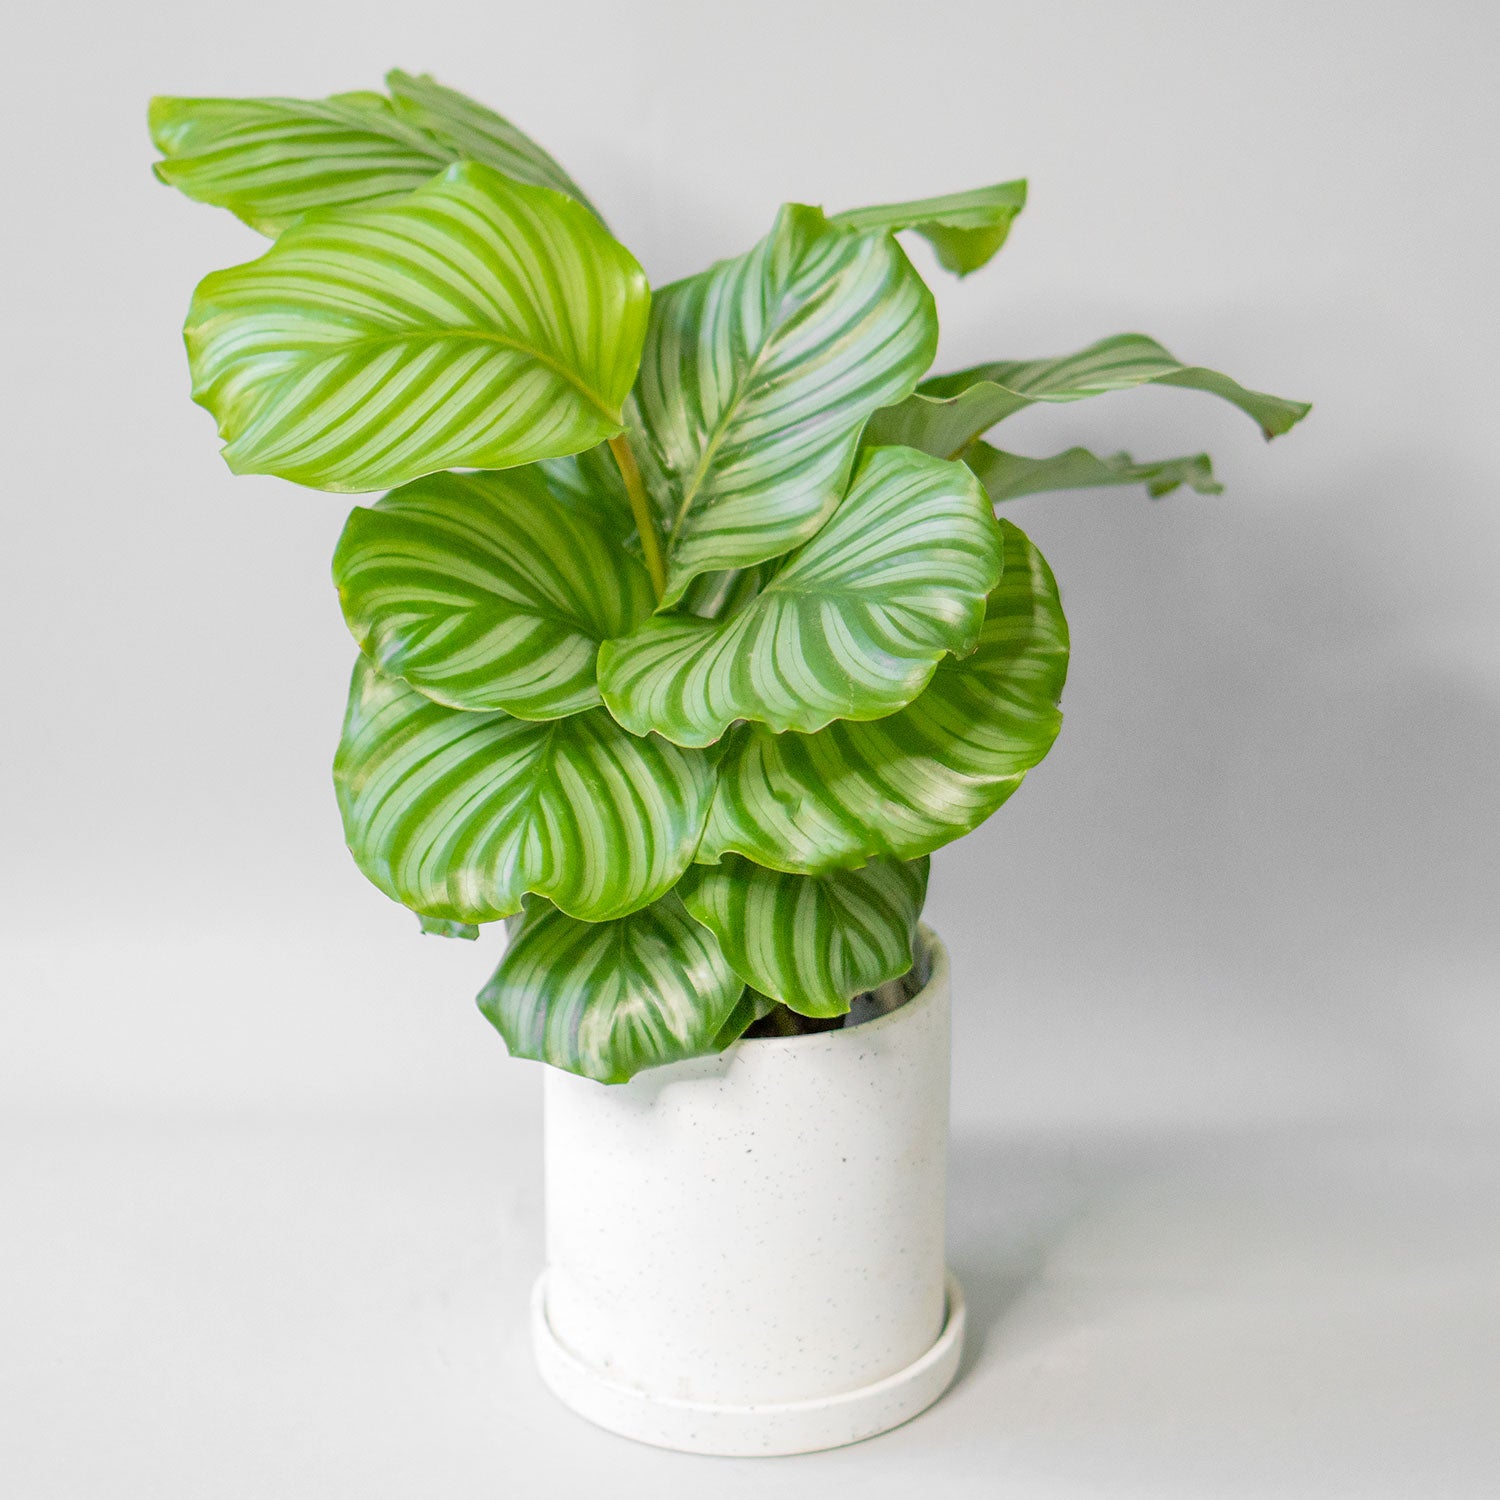 Potted Prayer Plant - Best Quality Houseplant Calathea Orbifolia 6” - Buy repotted  indoor plant Calathea Orbifolia for delivery at Planteia